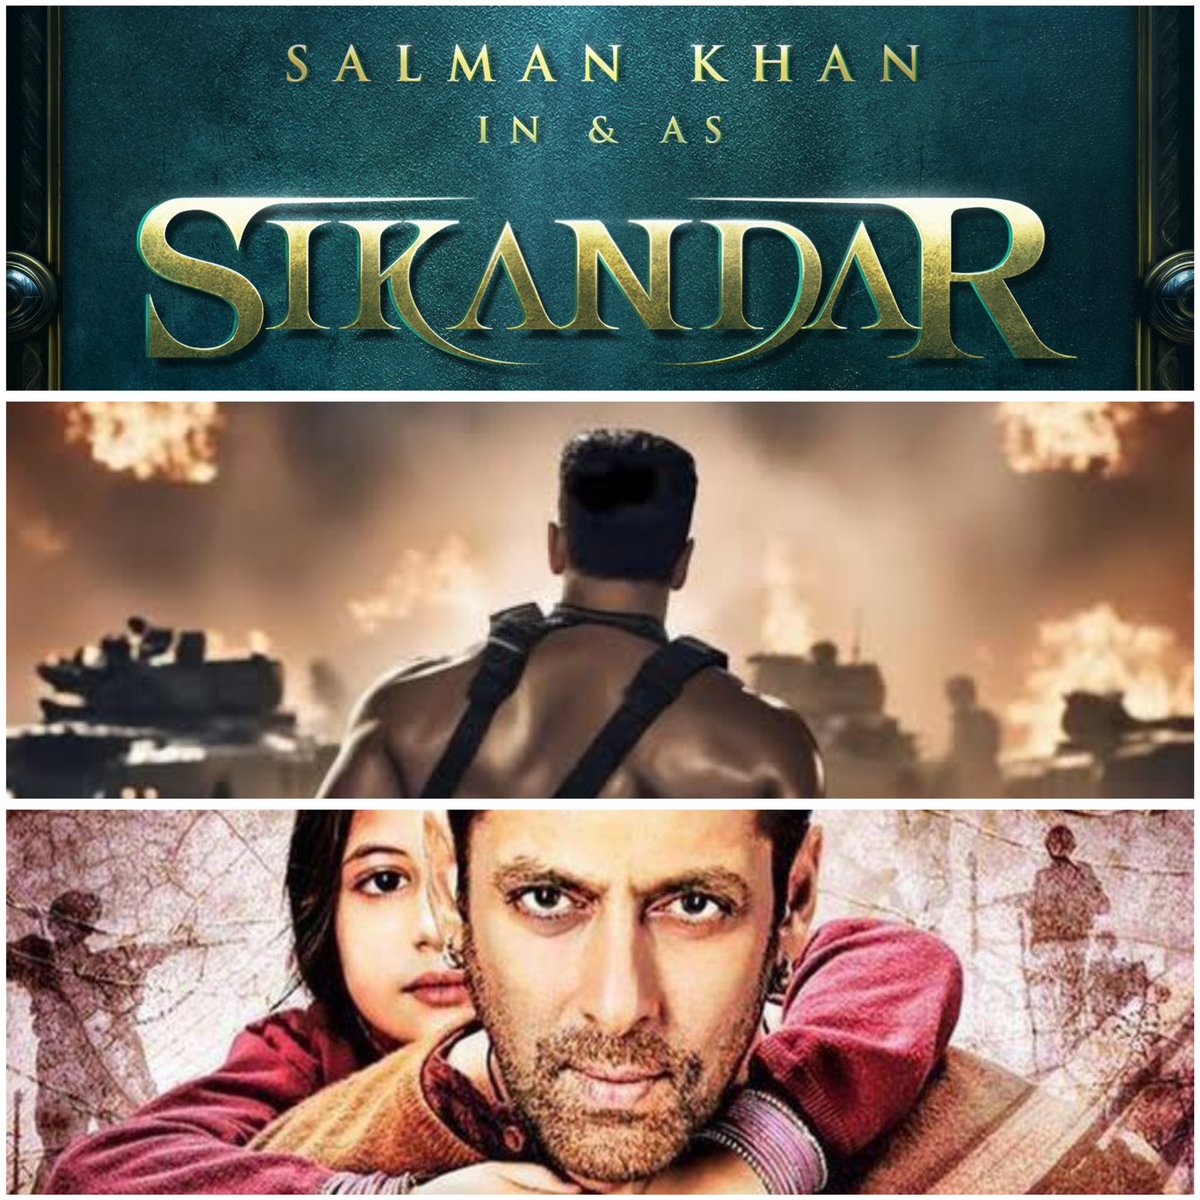 What's your take on #SalmanKhan's powerhouse lineup:

#Sikandar
#TheBull
The Blockbuster return of #BajrangiBhaijaan ? 🤔🎬

#ExcitedMuch ??